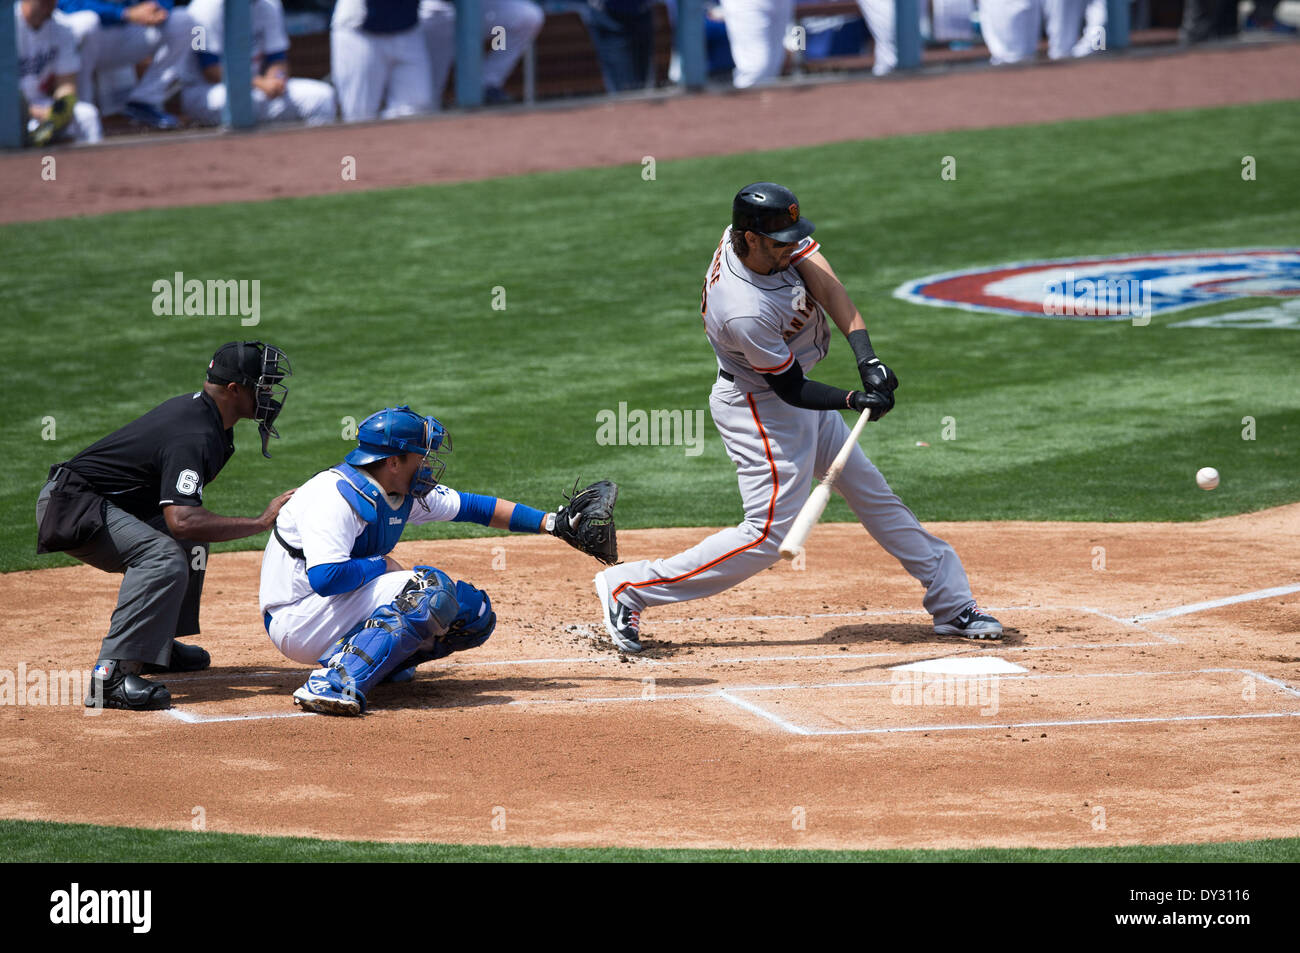 Los Angeles, CA, USA. 4th Apr, 2014. April 4, 2014 - Los Angeles, CA, United States of America - San Francisco Giants left fielder Michael Morse (38) in action during the MLB game between San Francisco Giants and Los Angeles Dodgers at the Dodgers Stadium in Los Angeles, CA. Credit:  csm/Alamy Live News Stock Photo